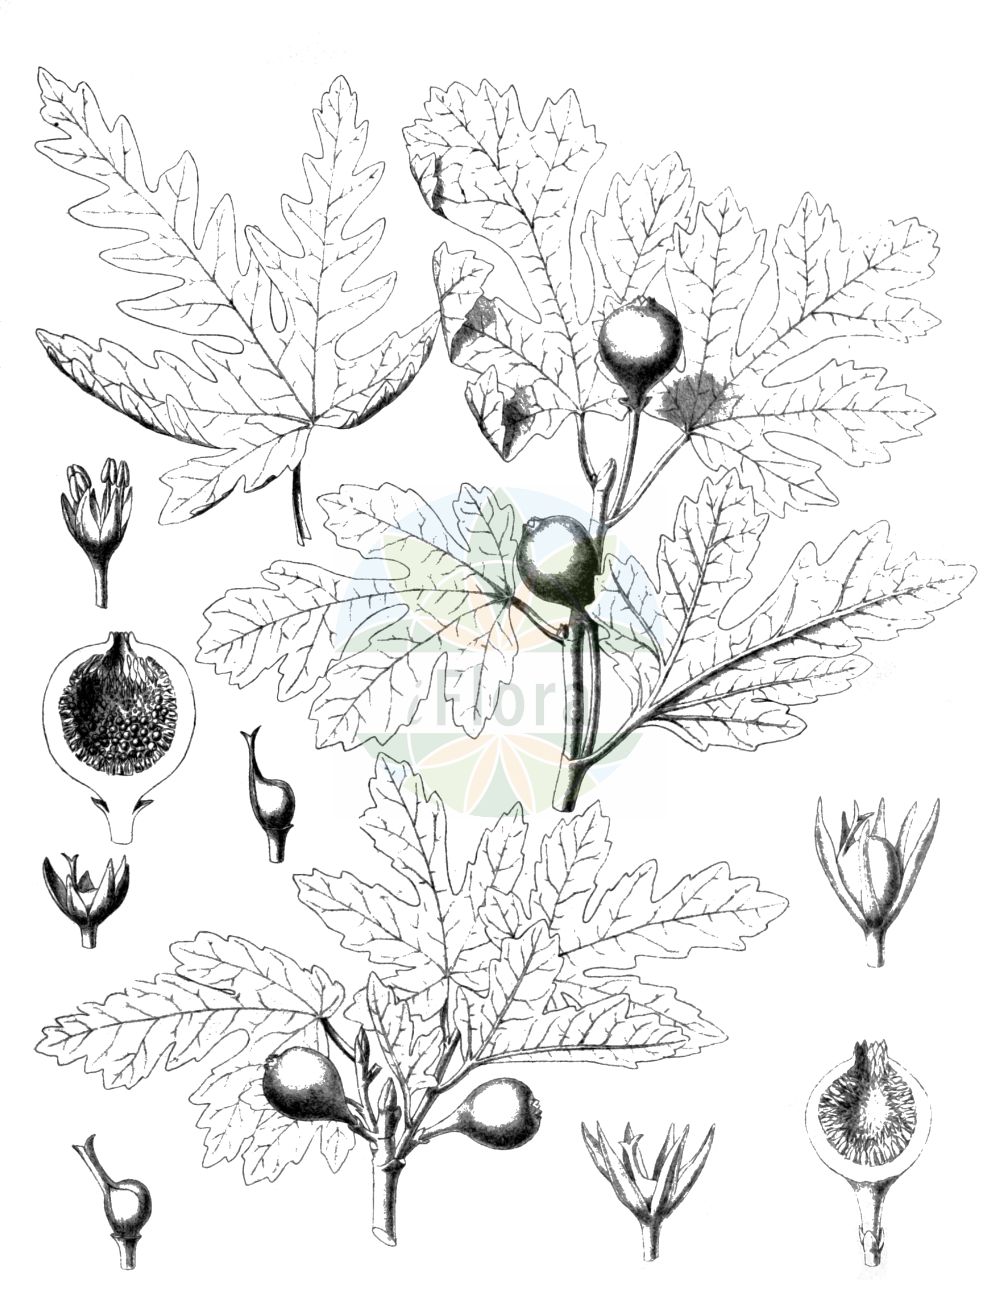 Historische Abbildung von Ficus carica (Fig). Das Bild zeigt Blatt, Bluete, Frucht und Same. ---- Historical Drawing of Ficus carica (Fig). The image is showing leaf, flower, fruit and seed.(Ficus carica,Fig,Ficus caprificus,Ficus carica,Ficus hyrcana,Ficus,Moraceae,Maulbeergewächse,Mulberry family,Blatt,Bluete,Frucht,Same,leaf,flower,fruit,seed)